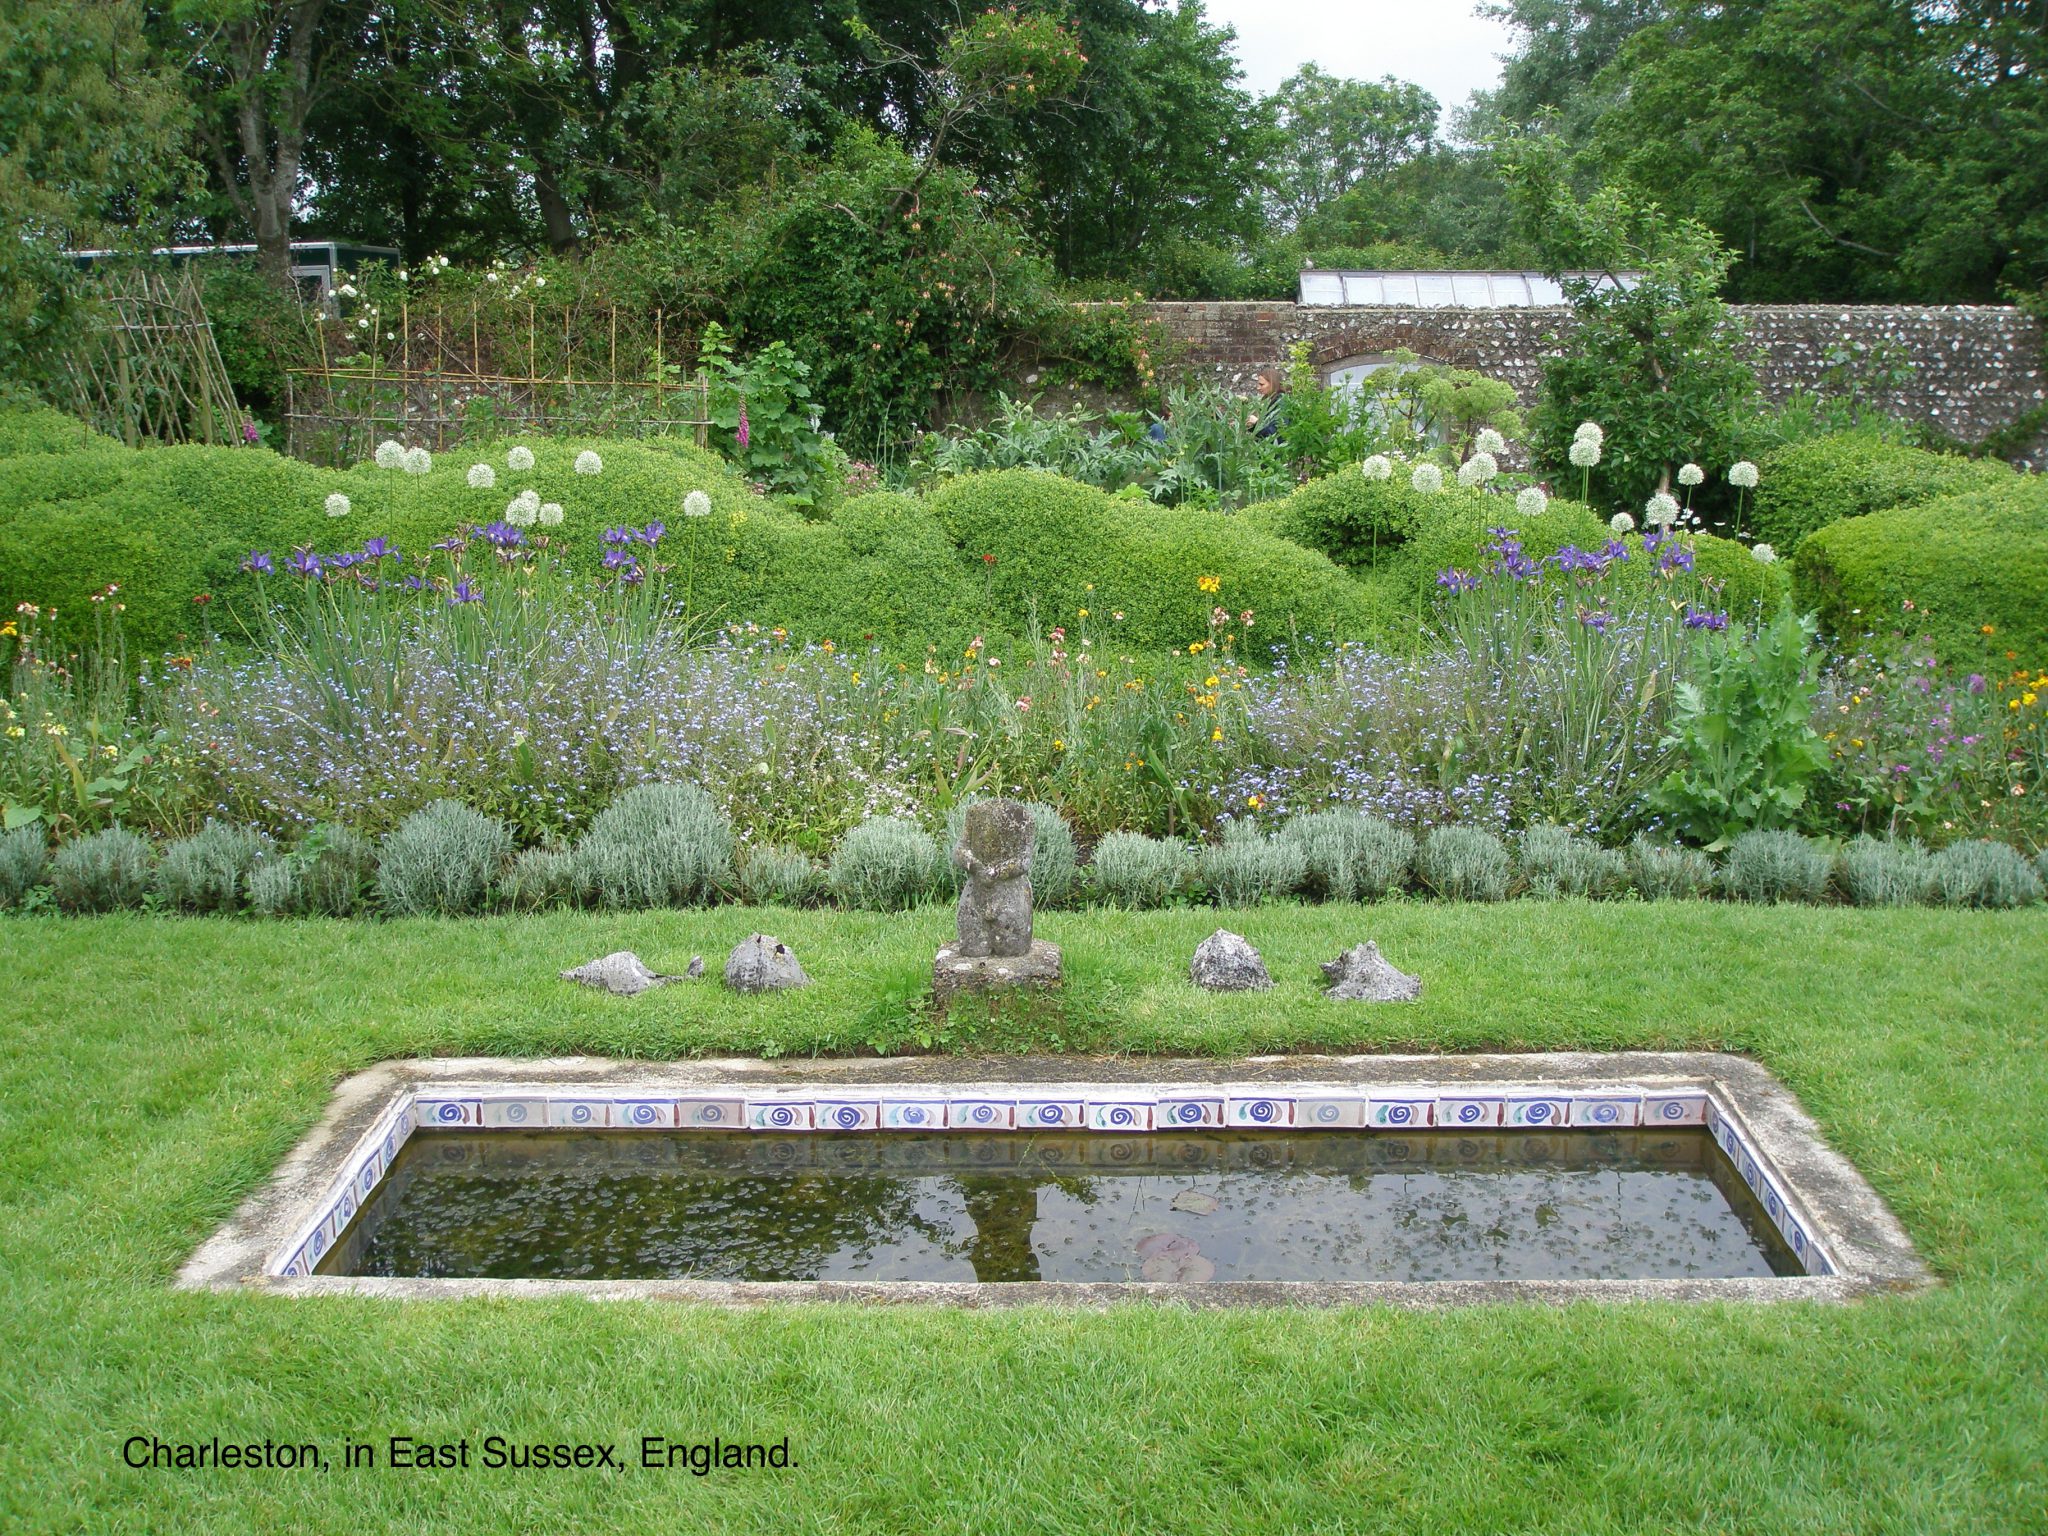 Charleston, East Sussex, England. A small pool at the center of the Walled Garden's lawn is edged with tiles that are reproductions of the original tiles, which were painted by Vanessa Bell in 1930.